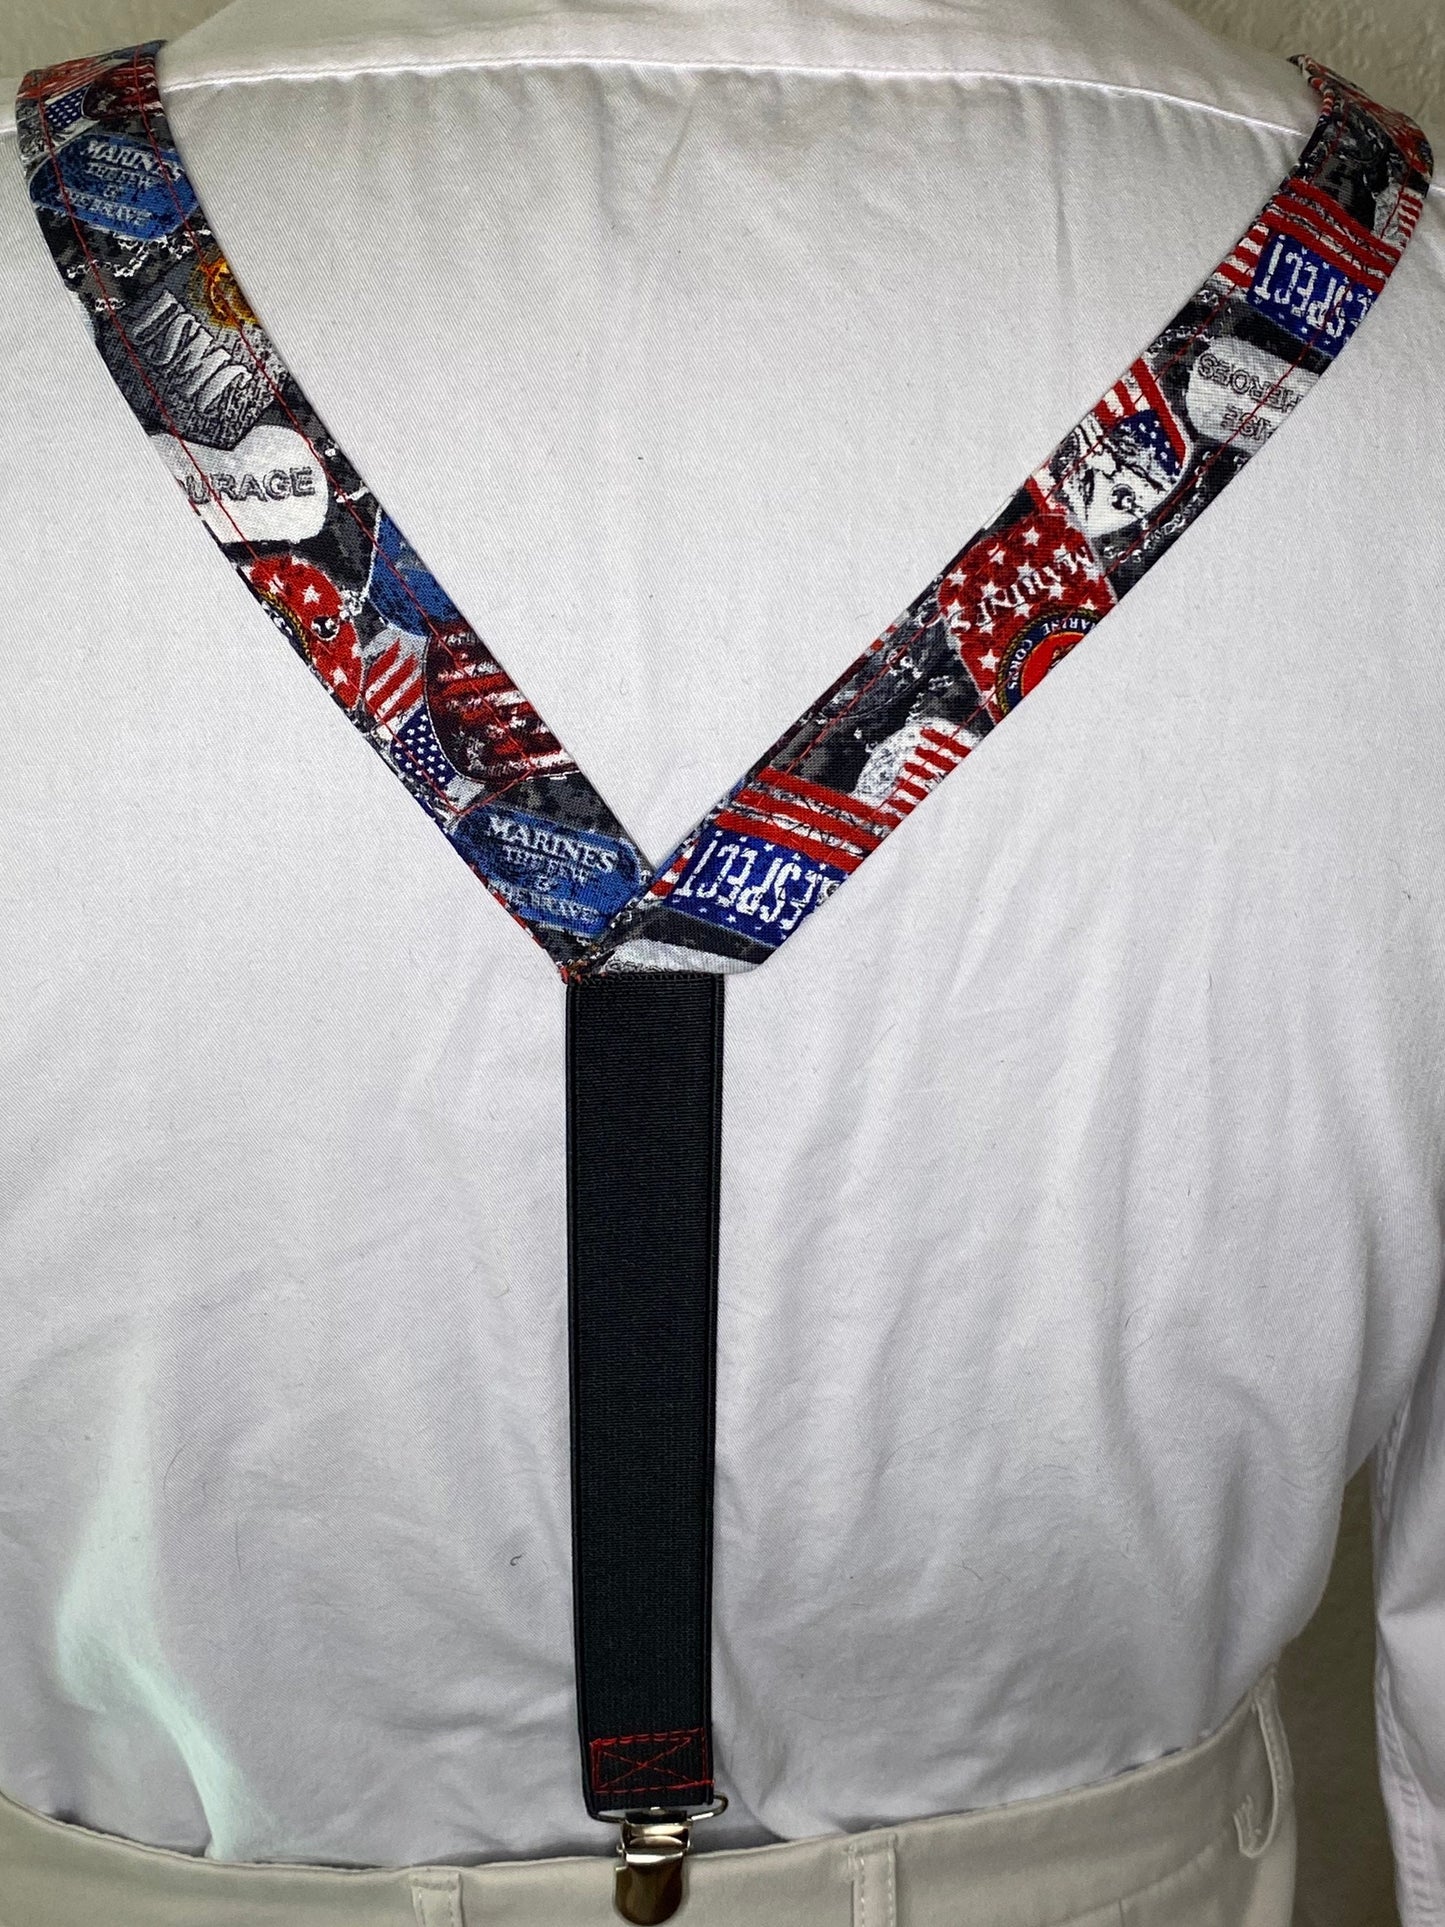 USMC Marine suspenders and bow tie / Infant, Toddler, Child, Teen, Adult, Big & Tall Oorah! Semper Fi